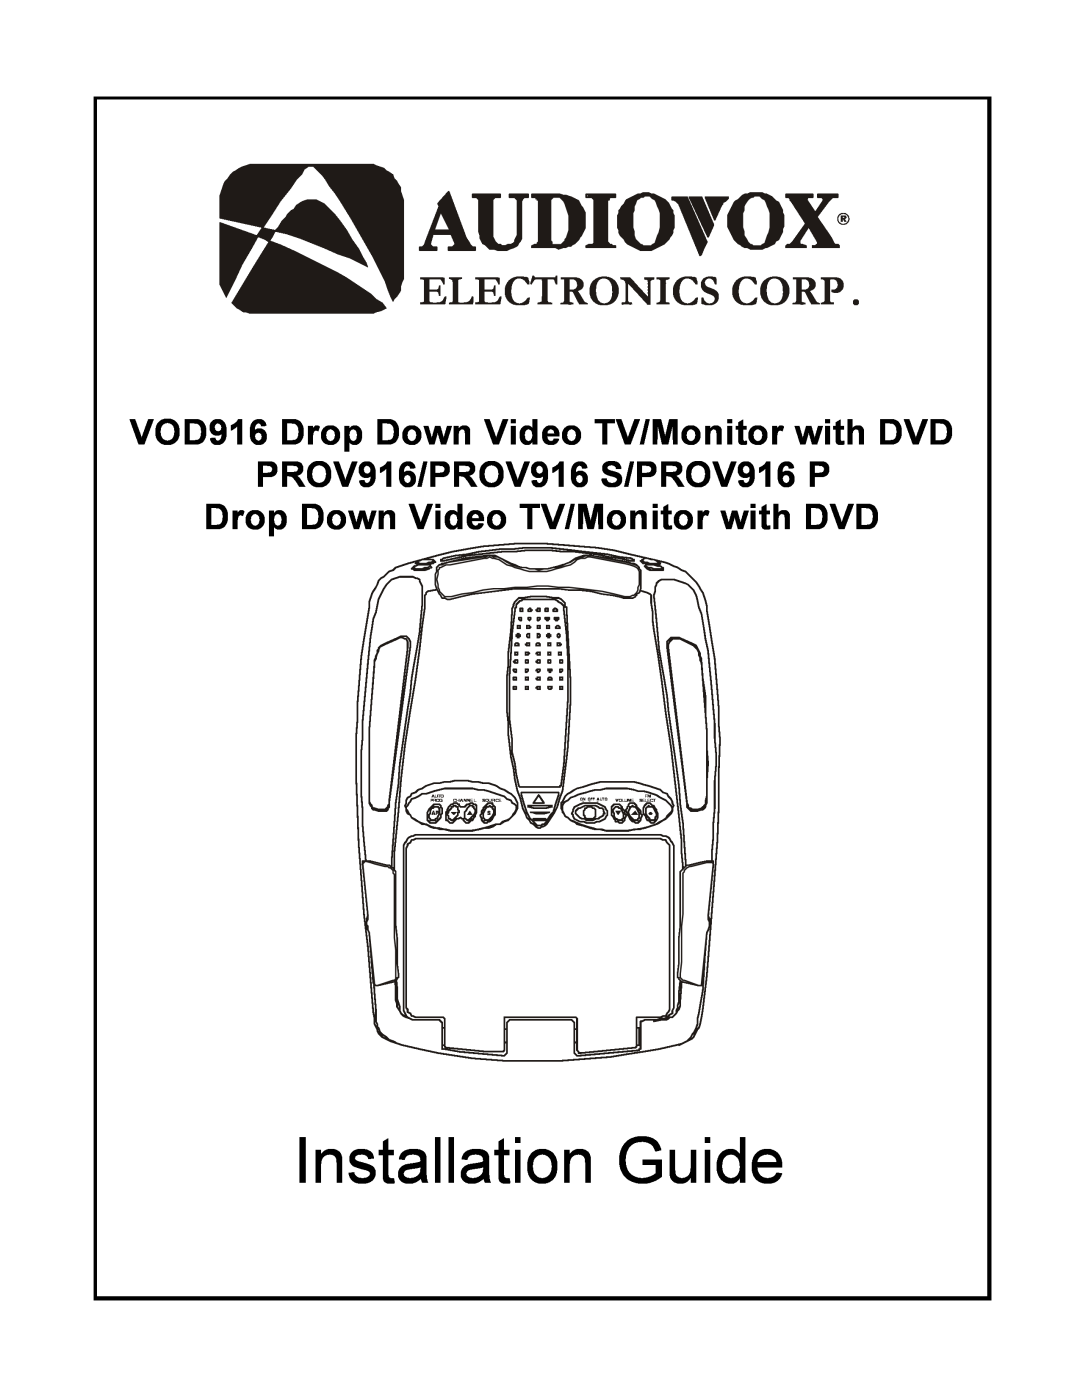 Audiovox PROV916 S manual VOD916 Drop Down Video TV/Monitor with DVD, Installation Guide, Electronics Corp, Auto, Prog 